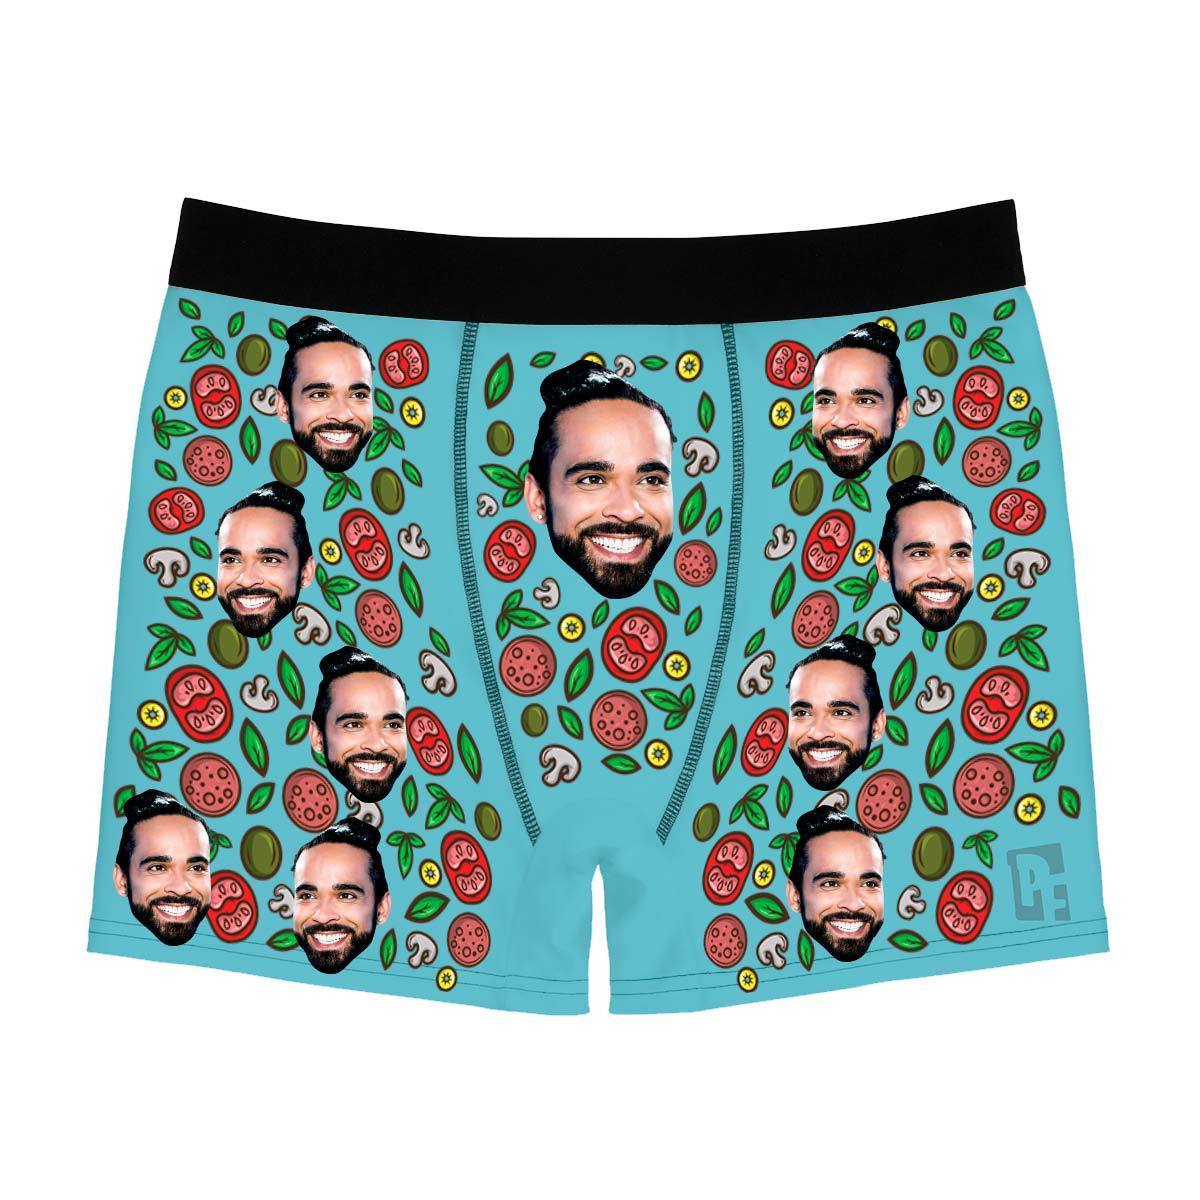 Blue Pizza men's boxer briefs personalized with photo printed on them